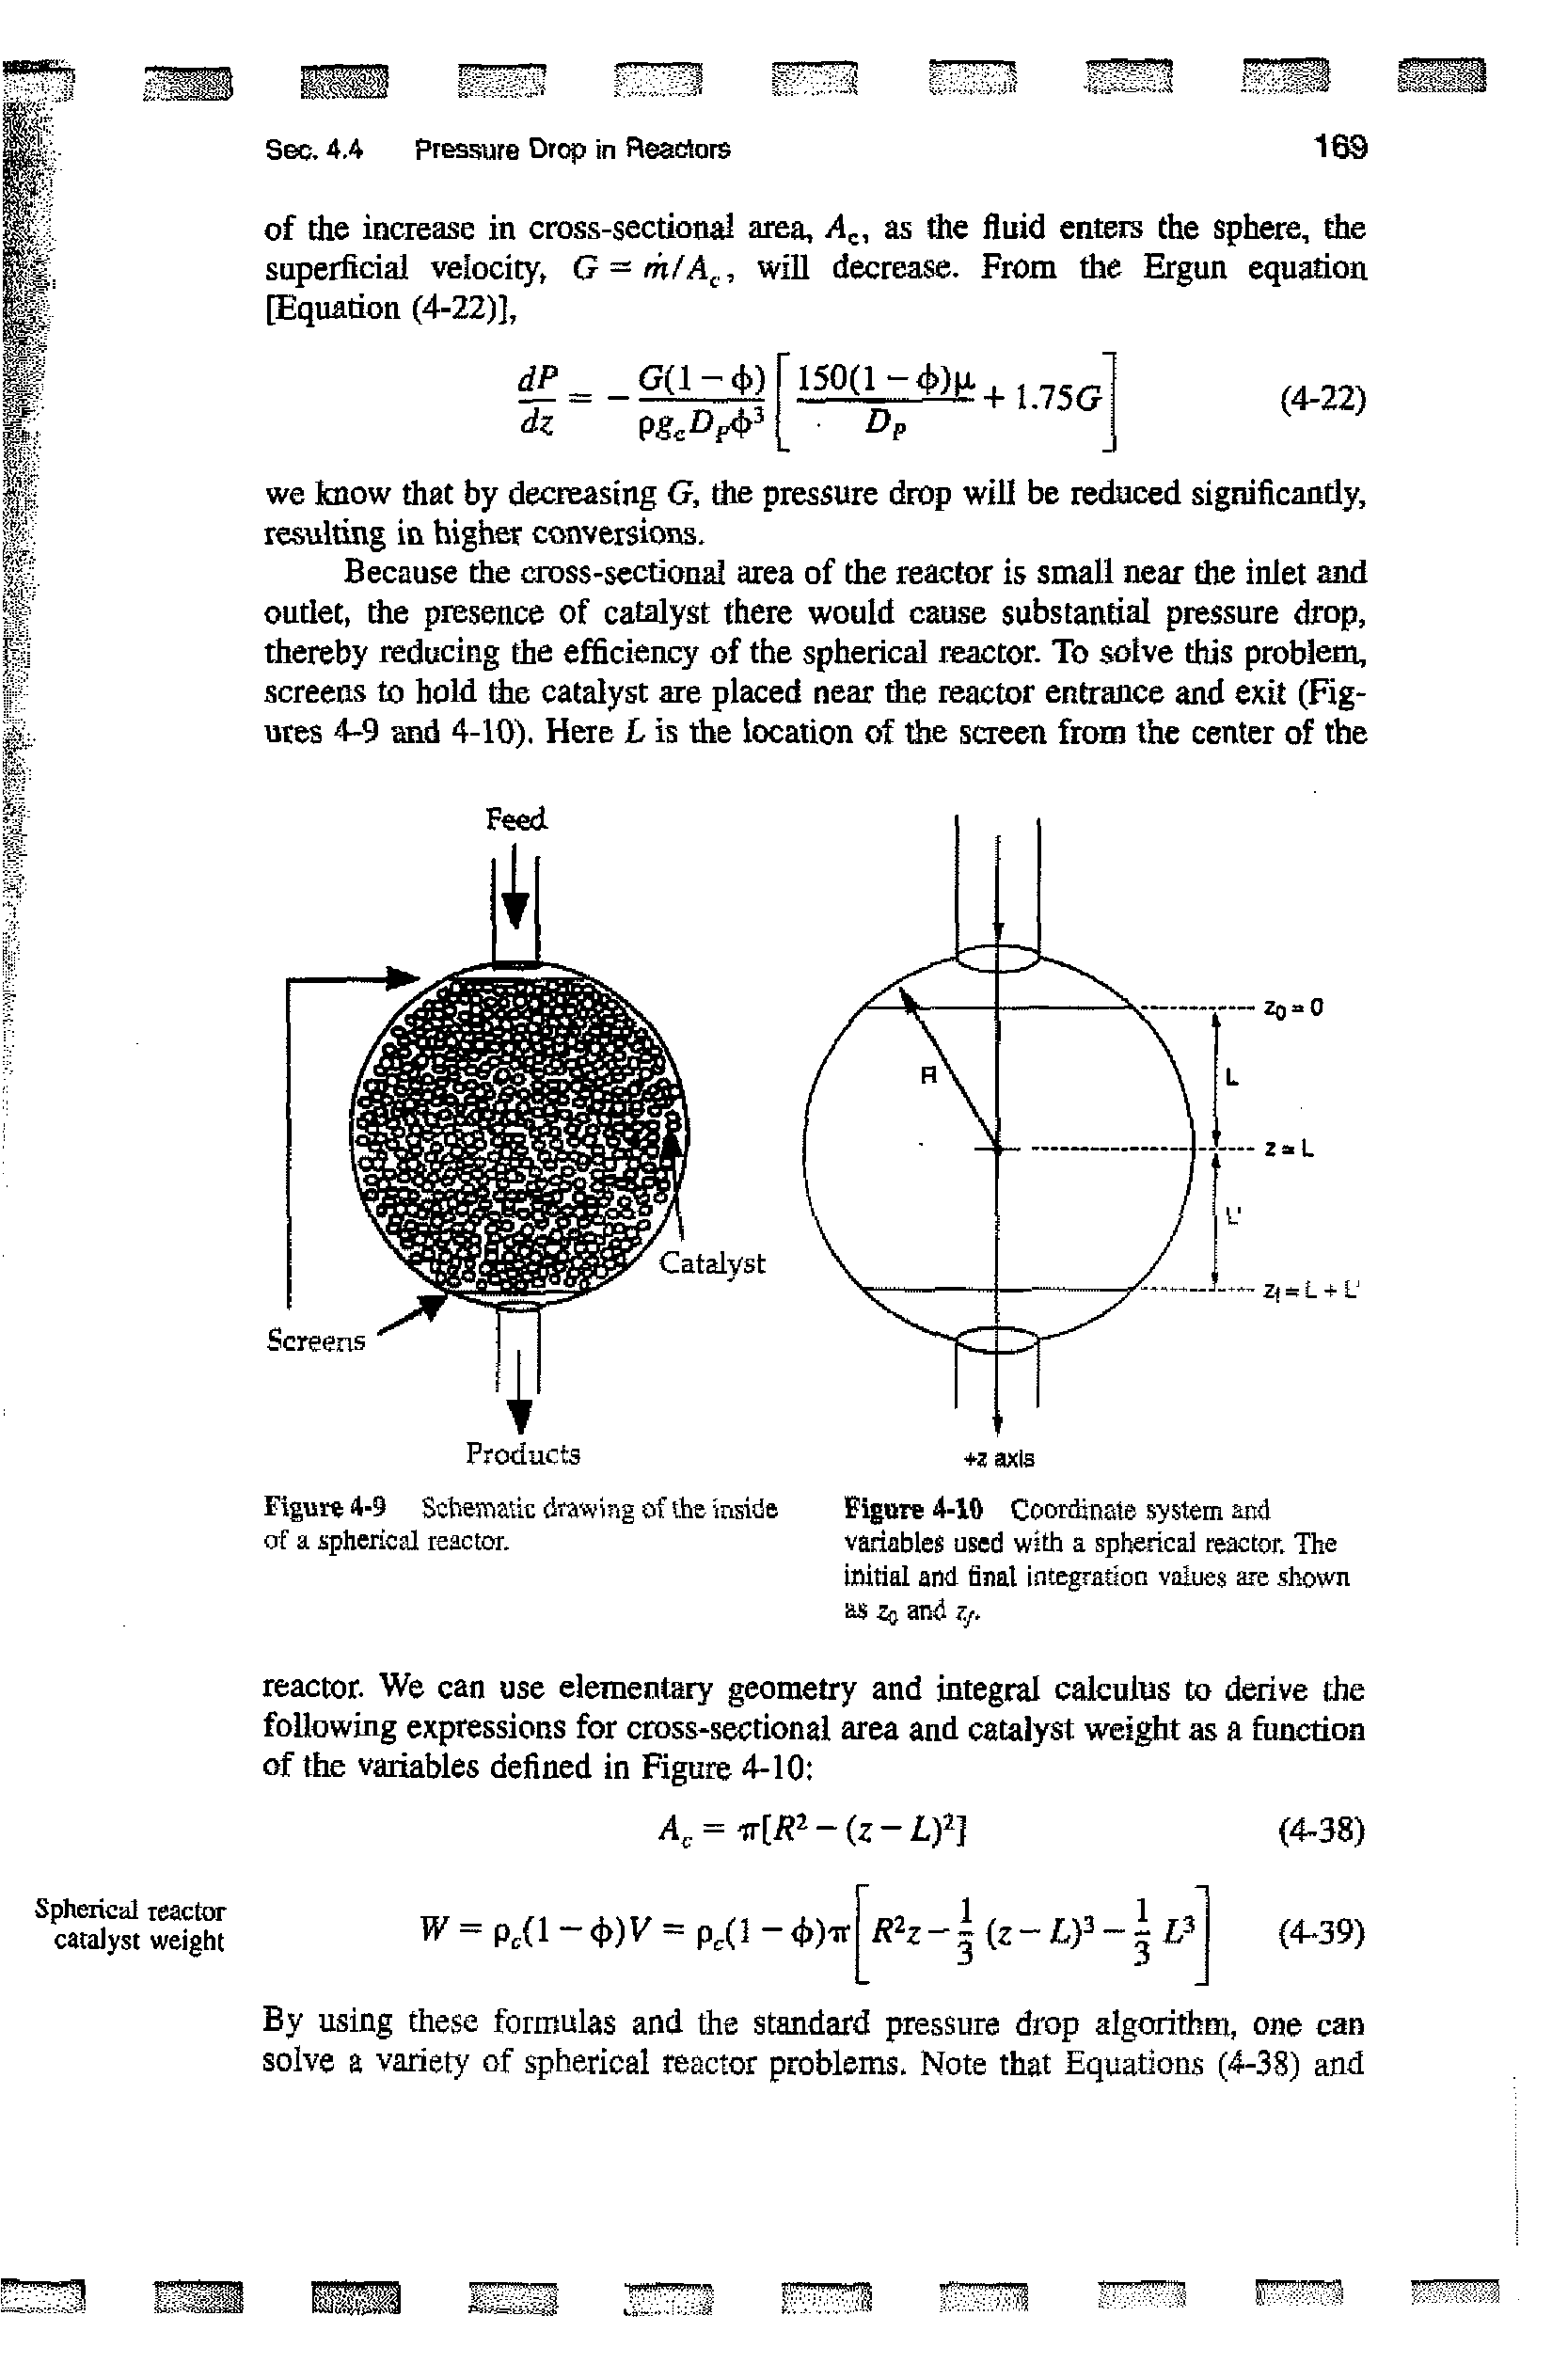 Figure 4-10 Coordinate system and variables used with a spherical reactor. The initial and final integration values are shown as Zo and Z/.